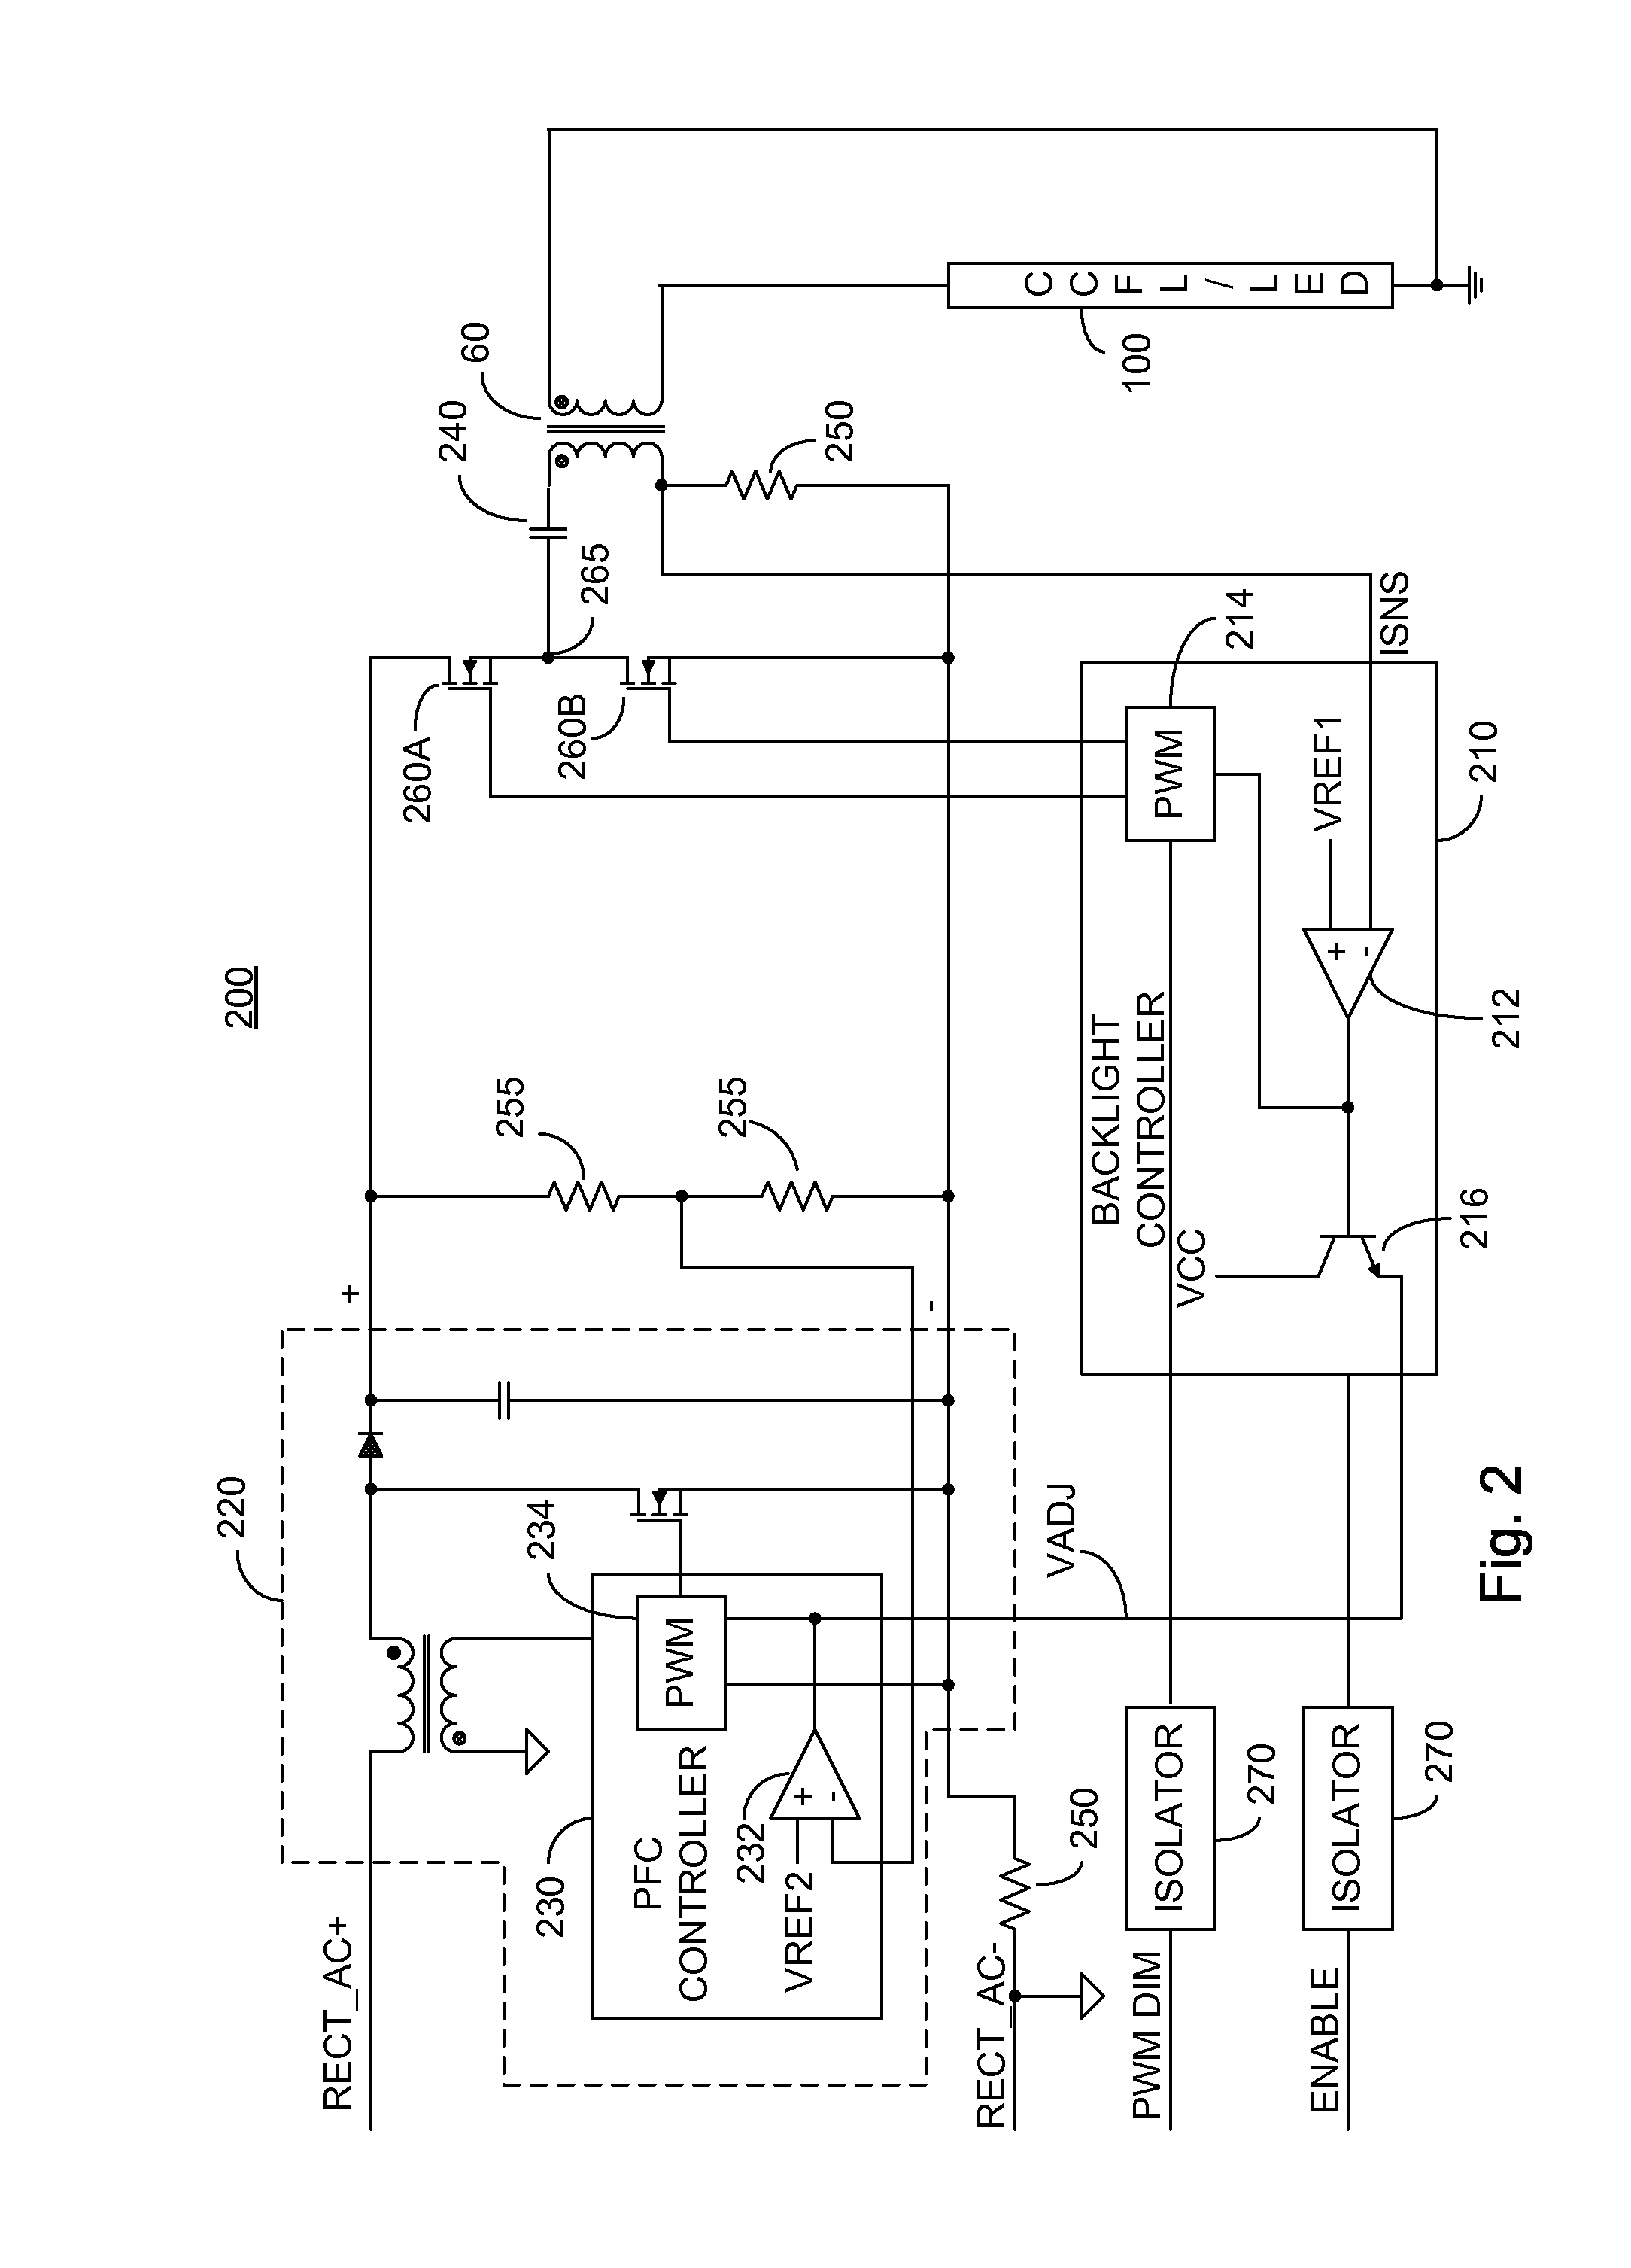 Integrated backlight control system